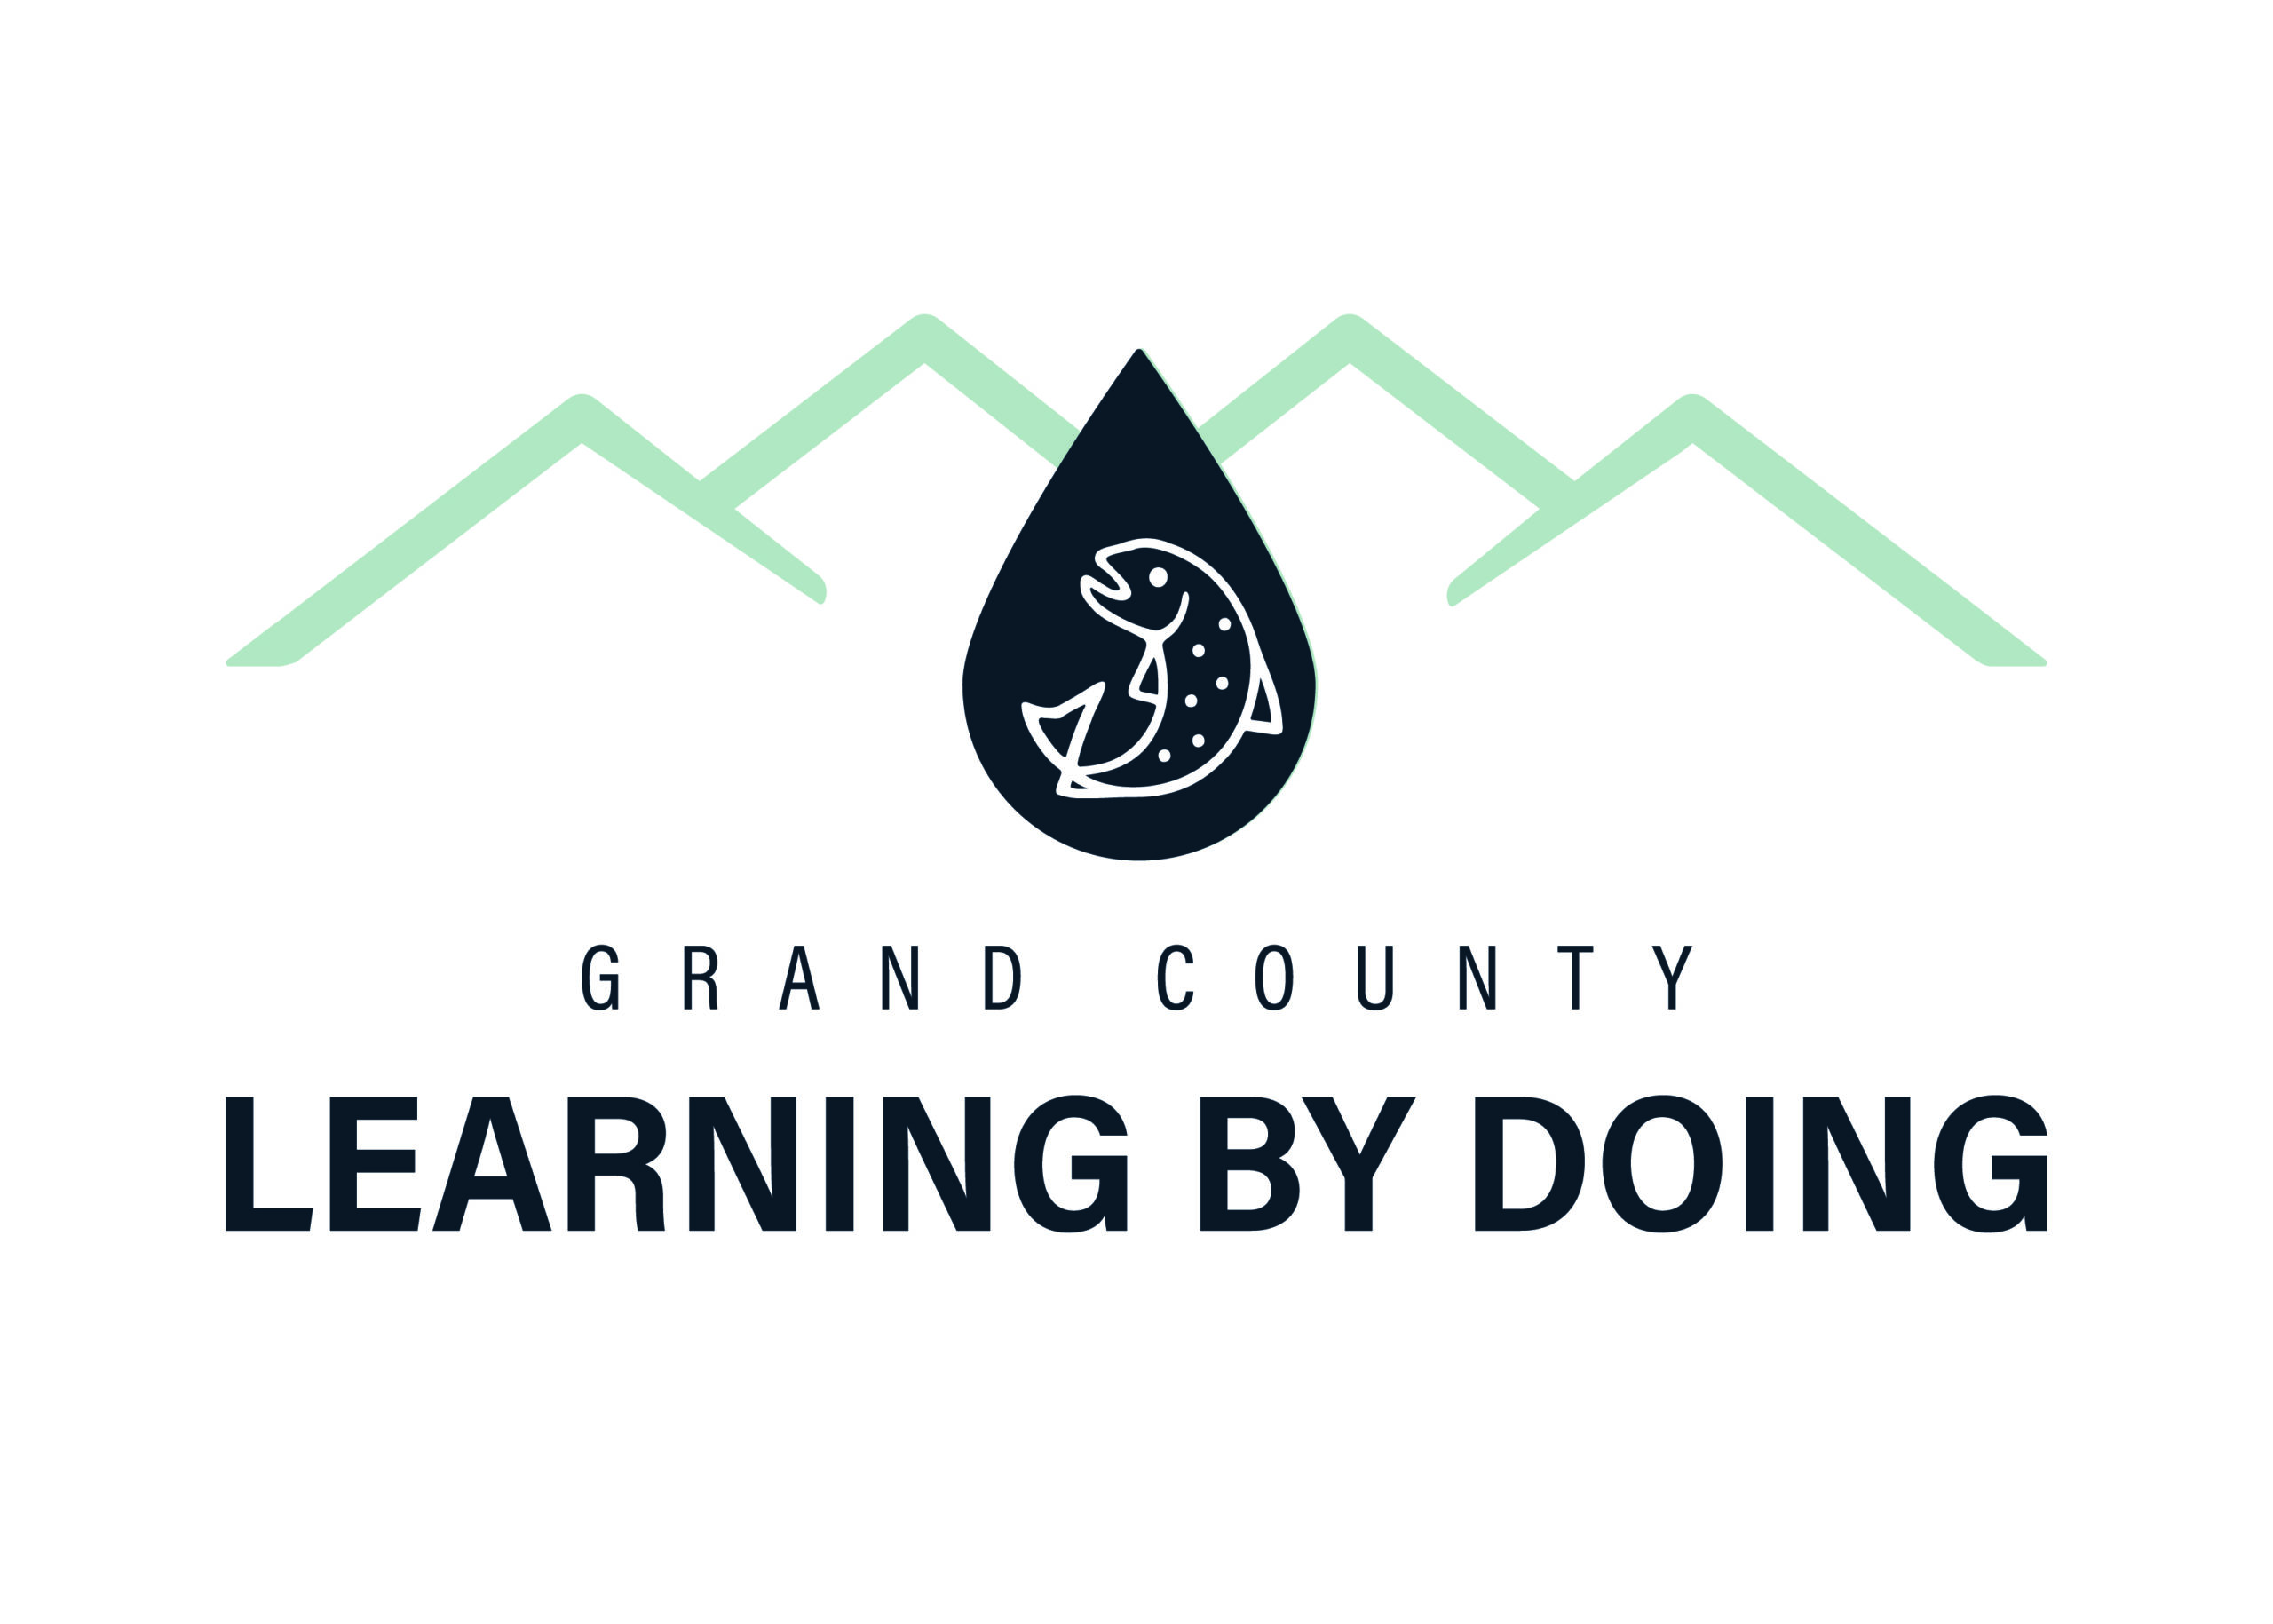 Grand County Learning By Doing